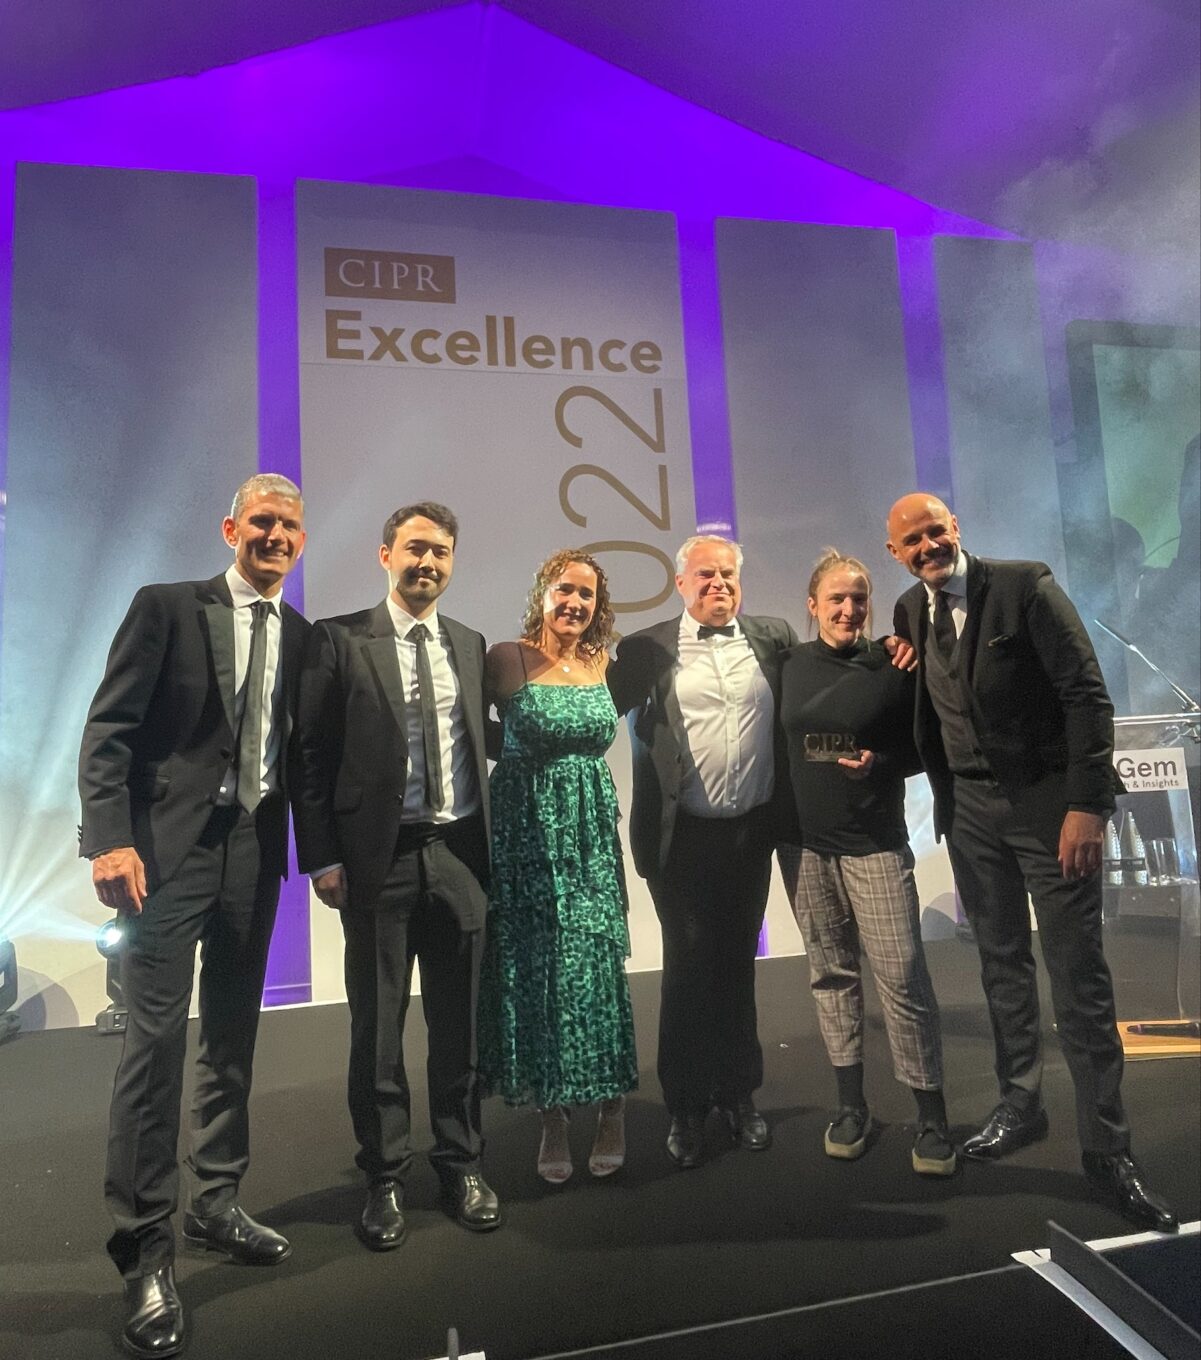 The IPC and FleishmanHillard team celebrate on stage at the CIPR Excellence Awards